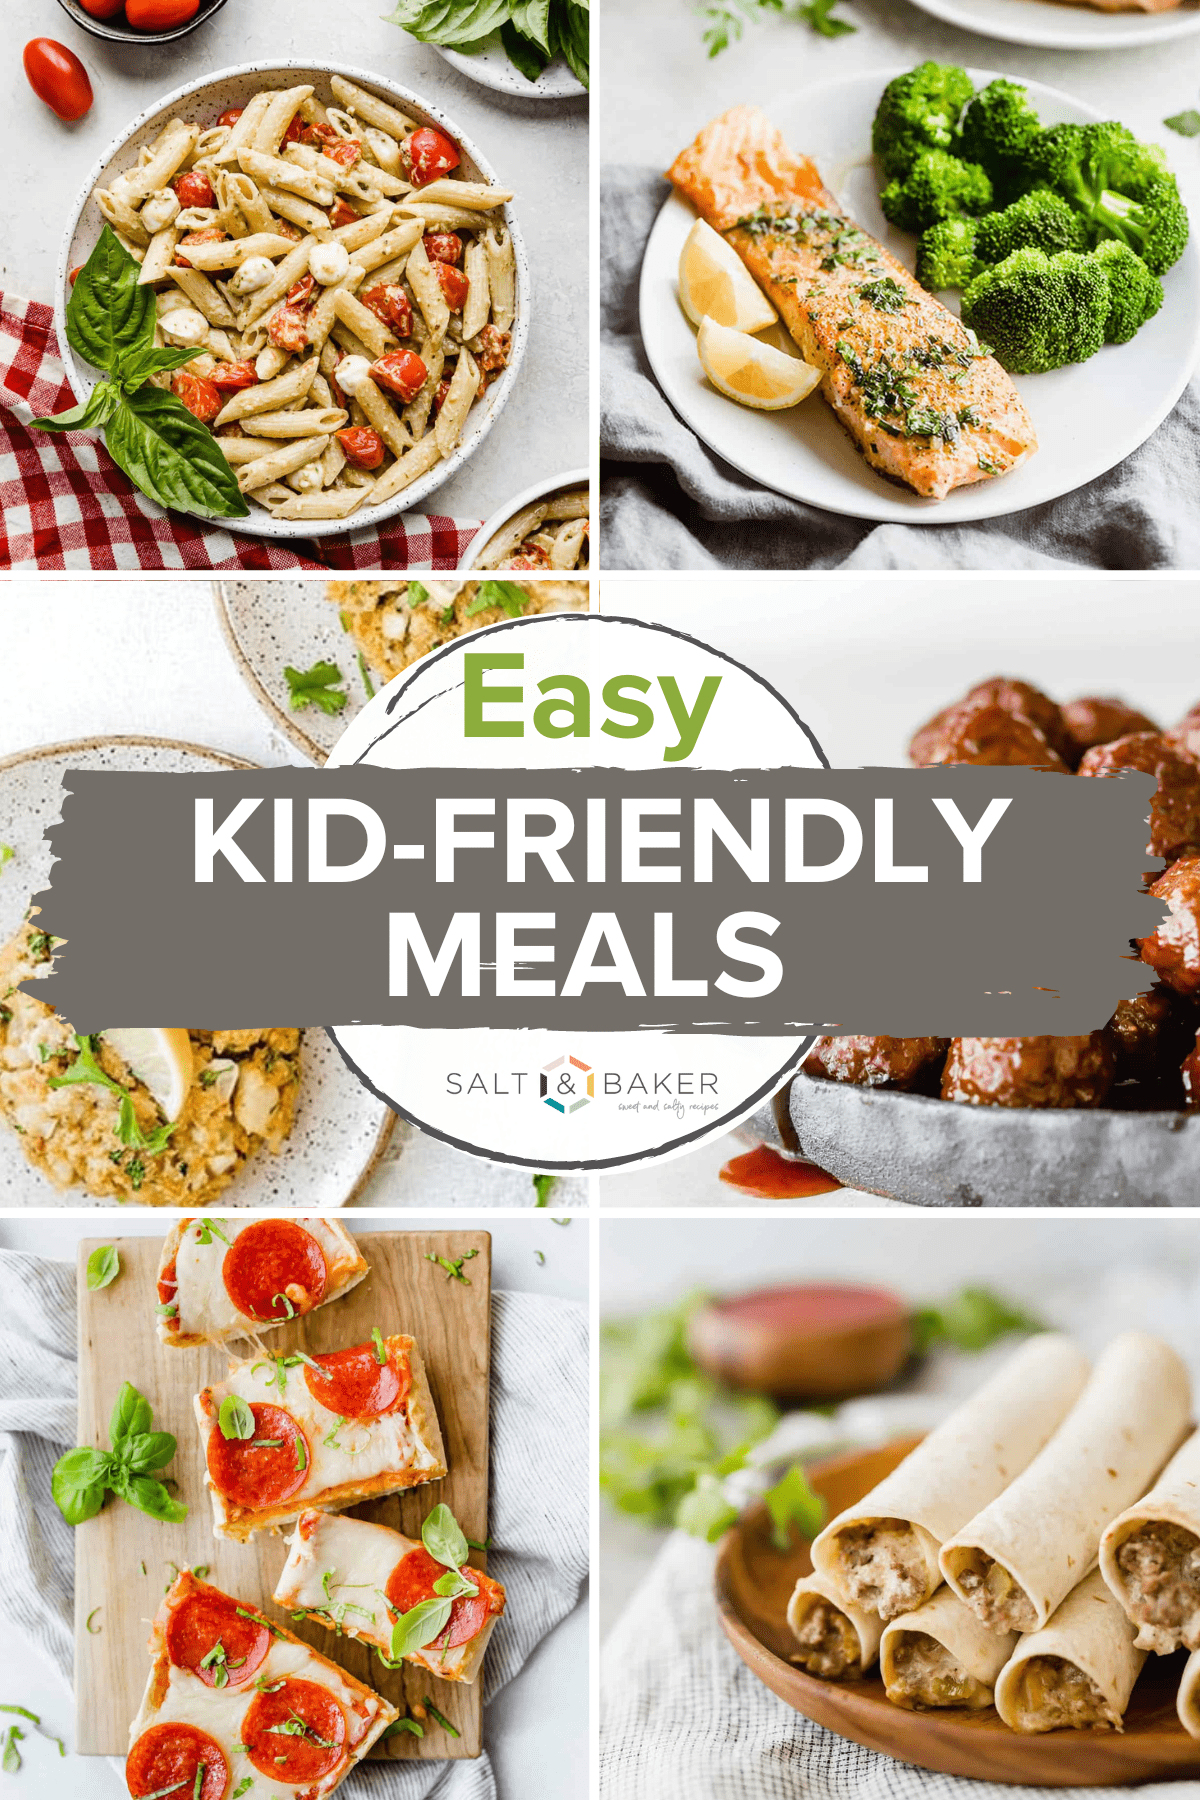 A collage of images featuring kid-friendly dinner recipes like French bread pizza, tomato and pesto pasta, lemon honey salmon and ground beef taquitos!